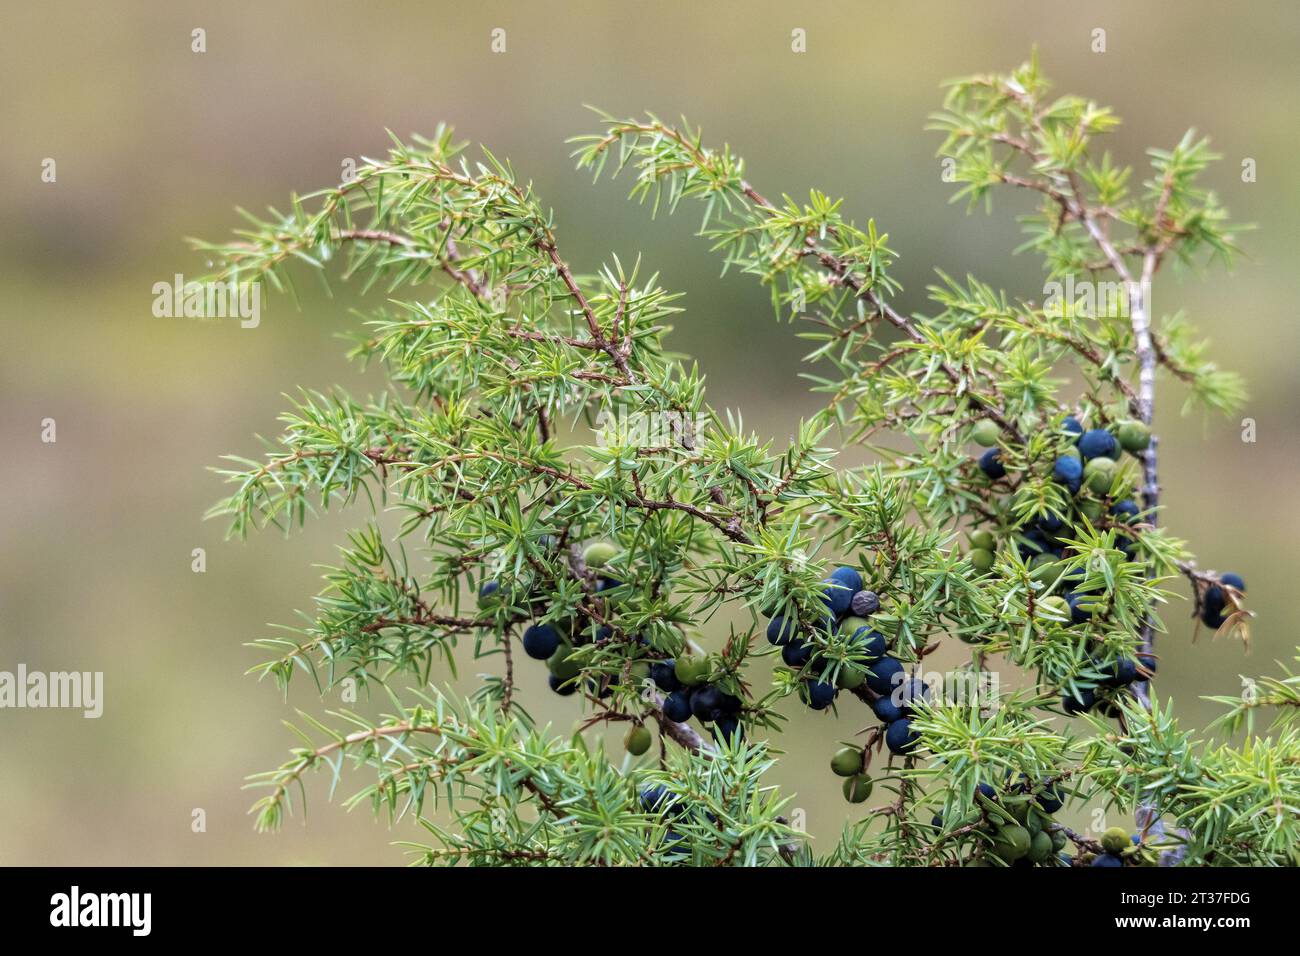 Juniper Berries at Svarterabben,Mosdalen, Ørsta, Norway, showing the stages of ripening and even one shriveling These are a flavour ingridient in gin. Stock Photo